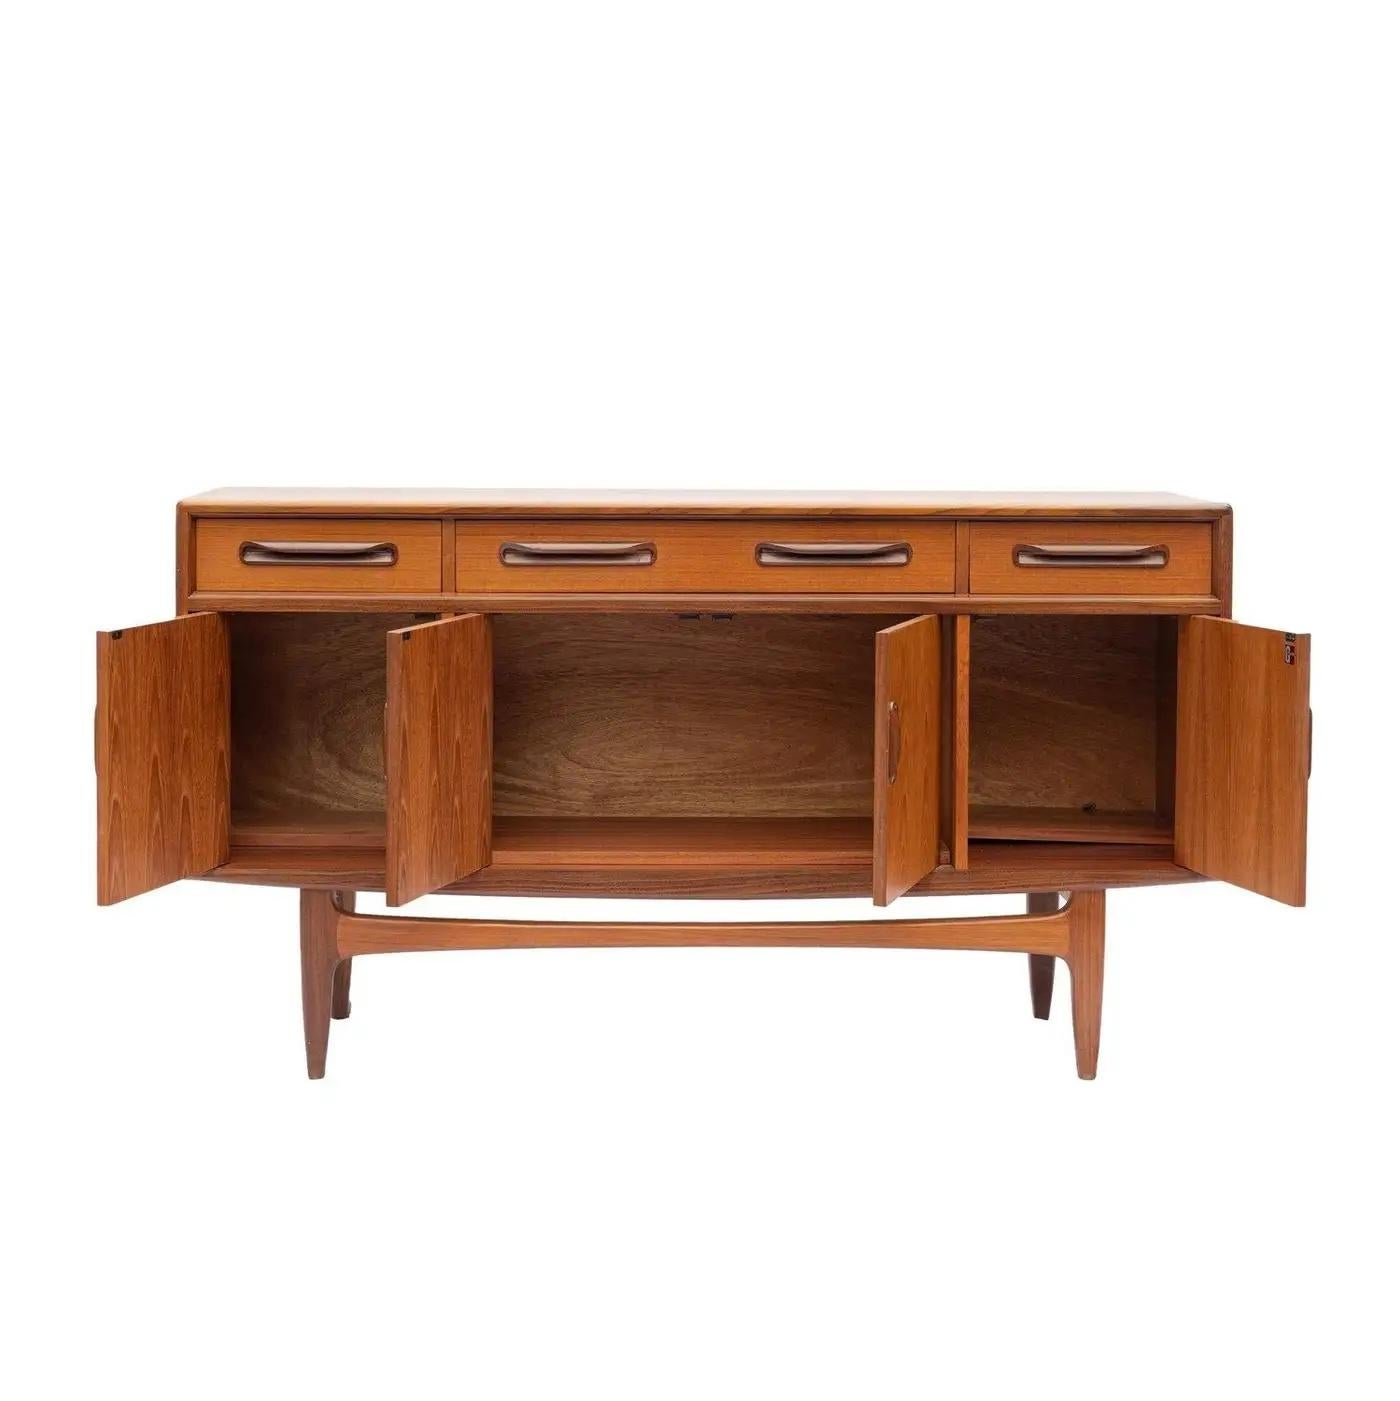 Mid-Century Modern Mid-Century Teak Fresco Sideboard by v. Wilkins for G Plan, English, Ca. 1960 For Sale